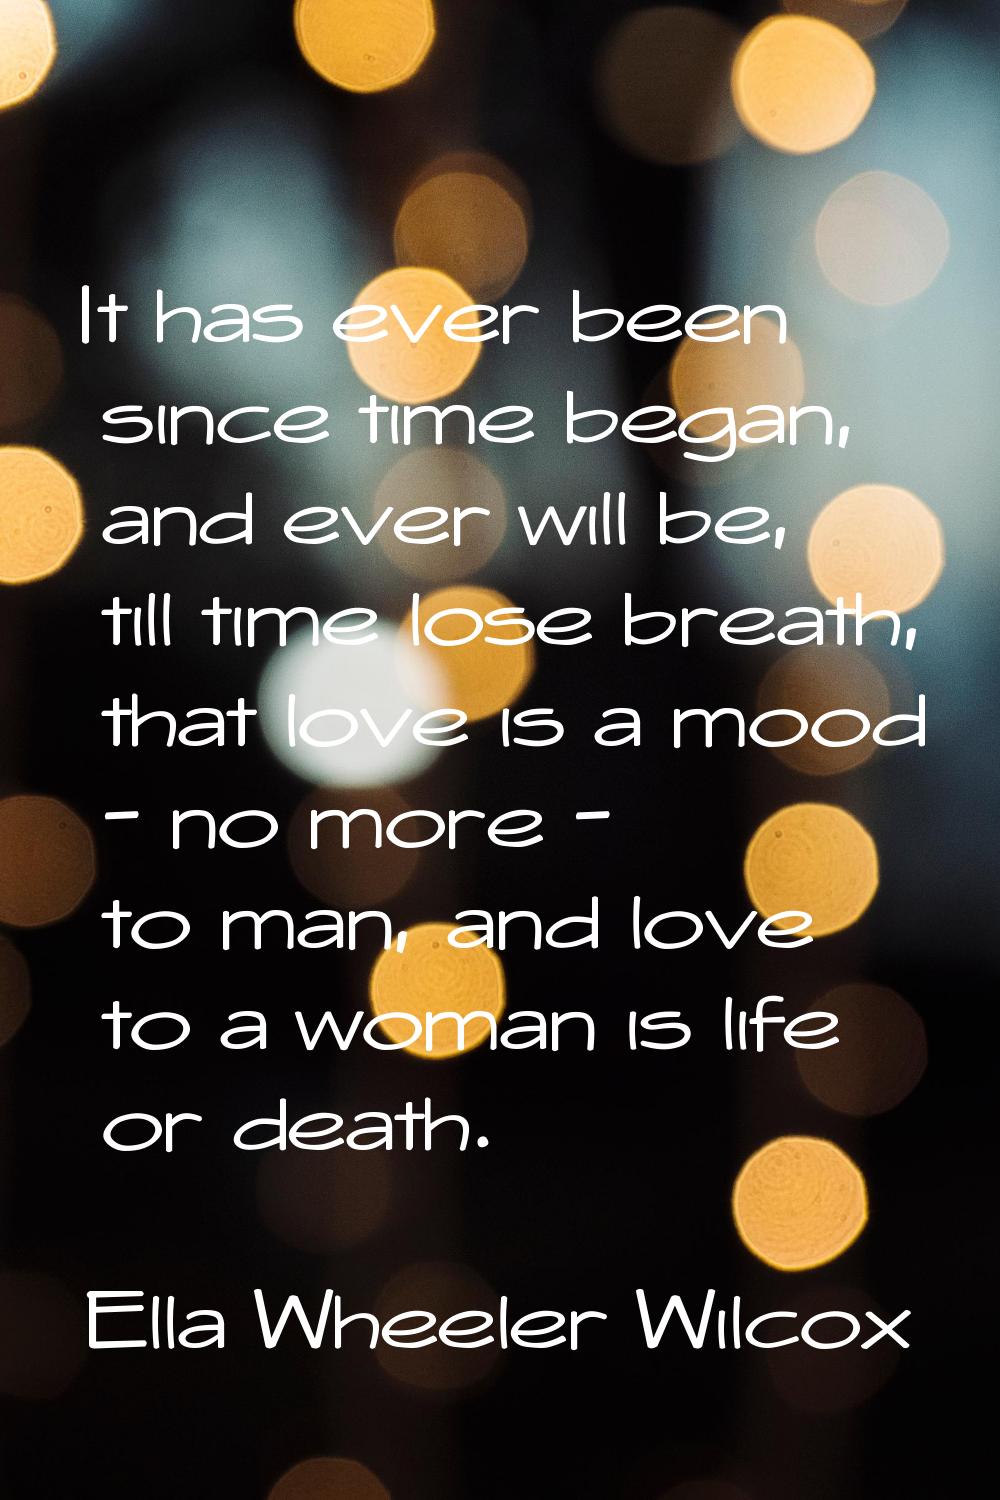 It has ever been since time began, and ever will be, till time lose breath, that love is a mood - n